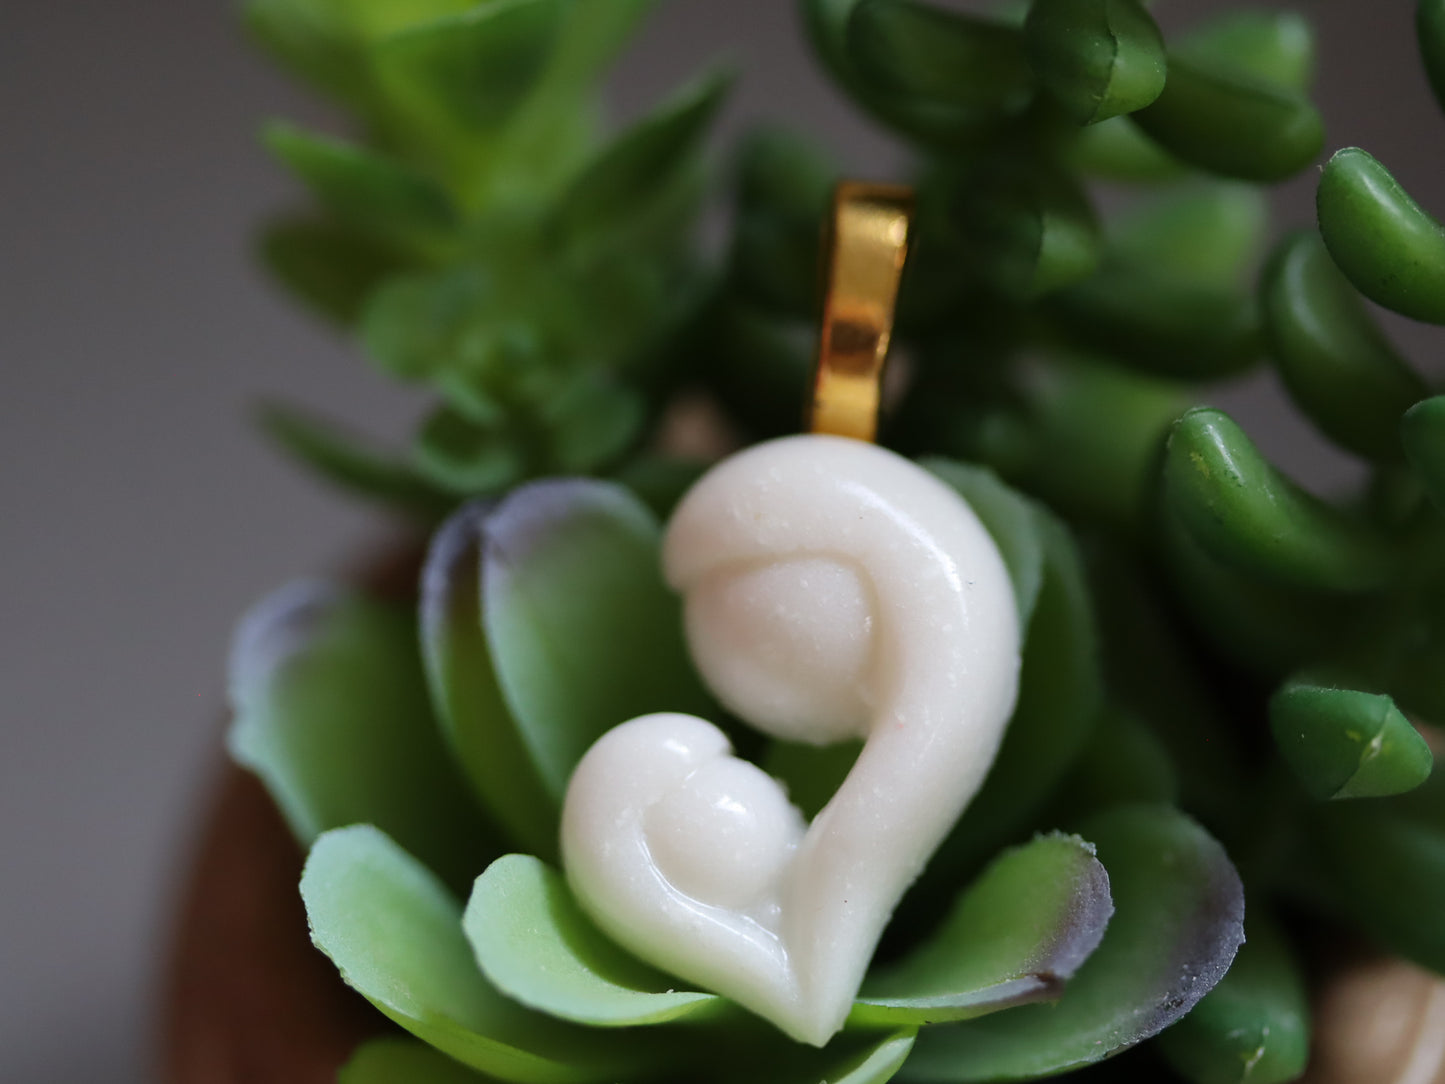 Mother and Child Pendant